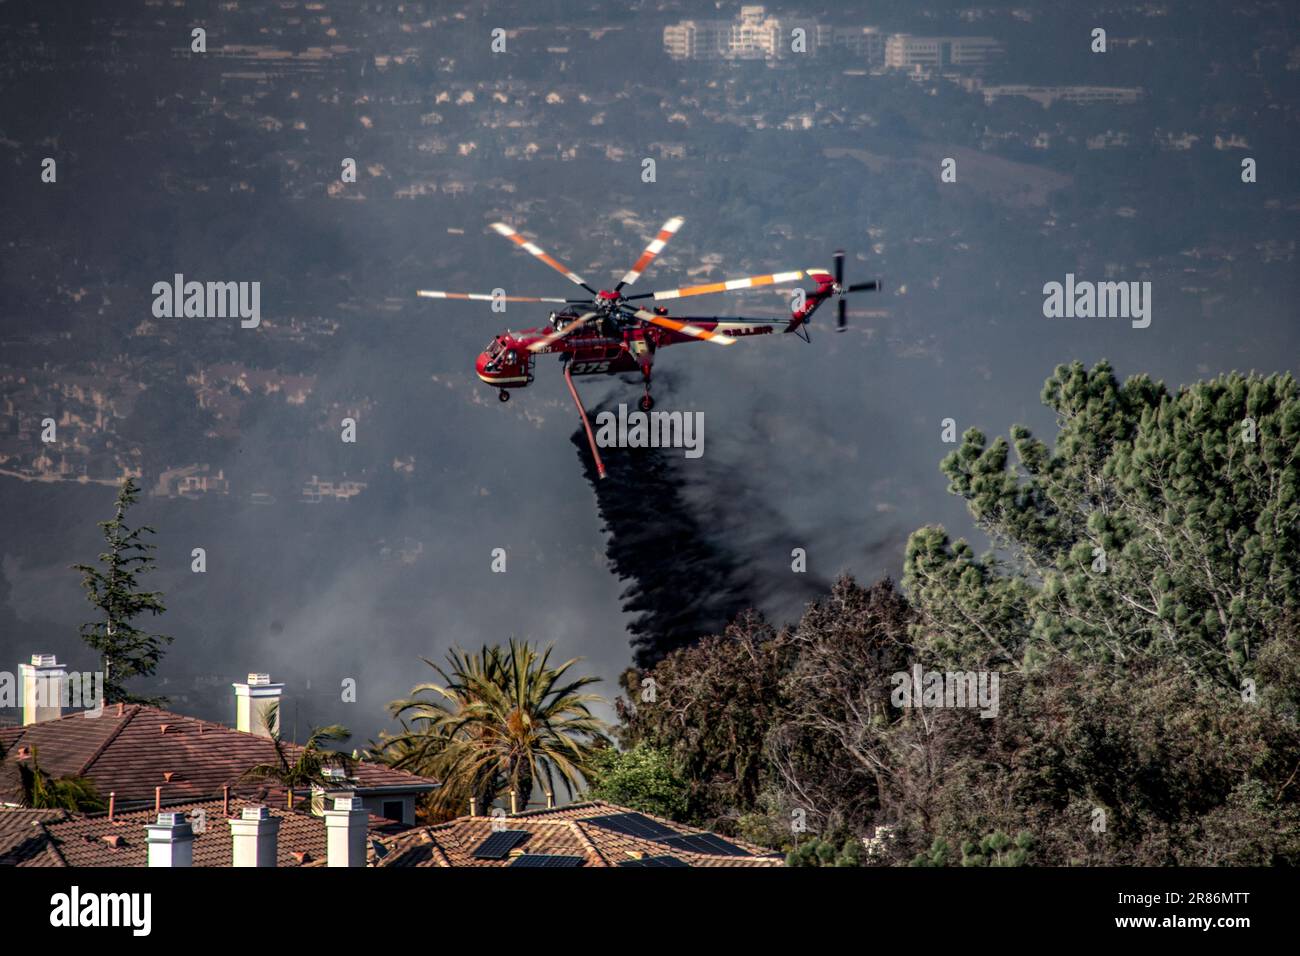 A fire fighting helicopter drops fire retardant on a blaze at a suburban residential community in Laguna Niguel, CA. Note smoky sky. Stock Photo